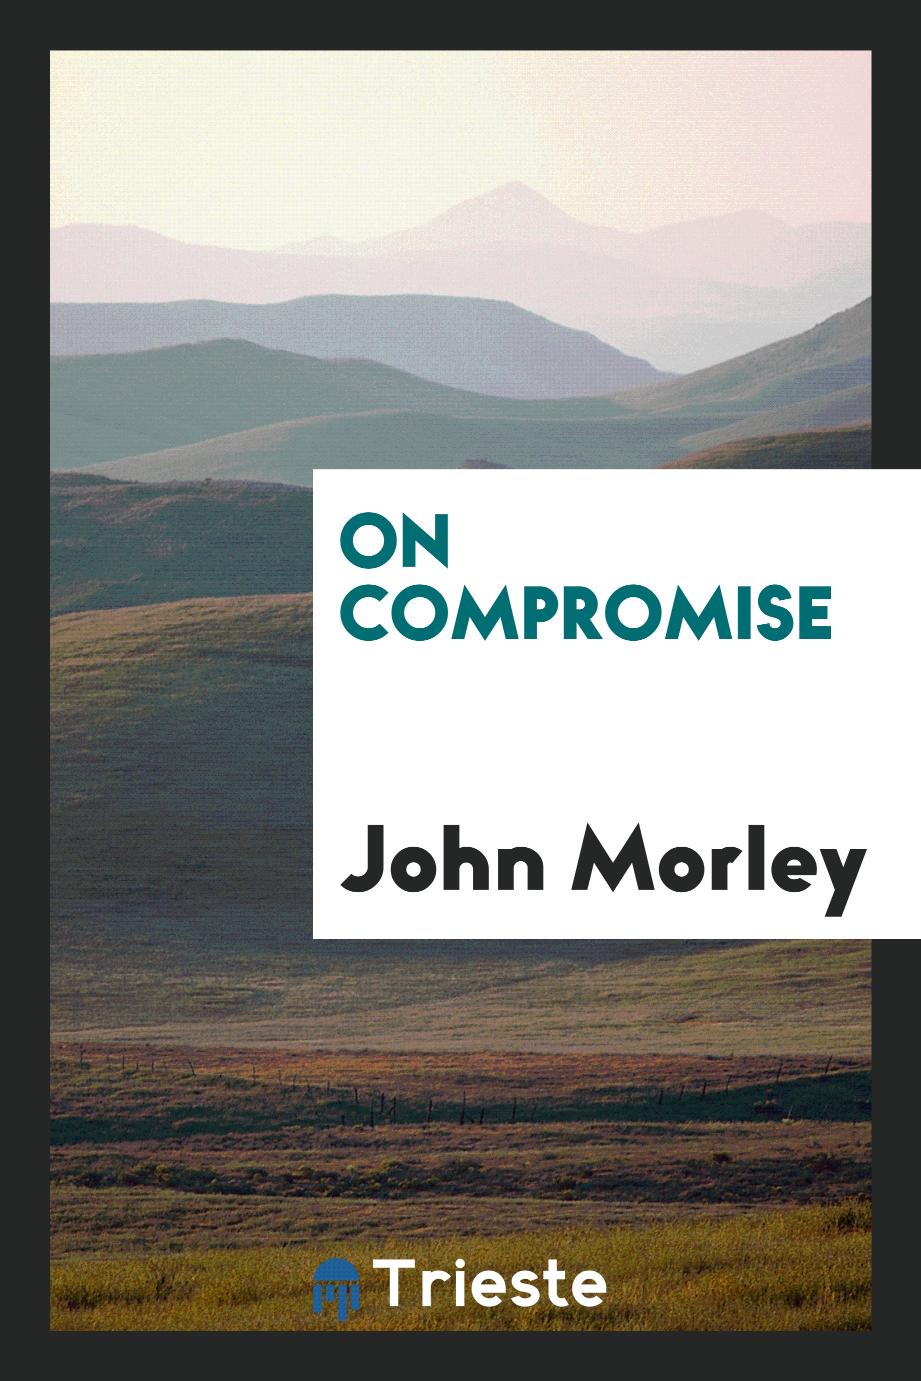 On compromise